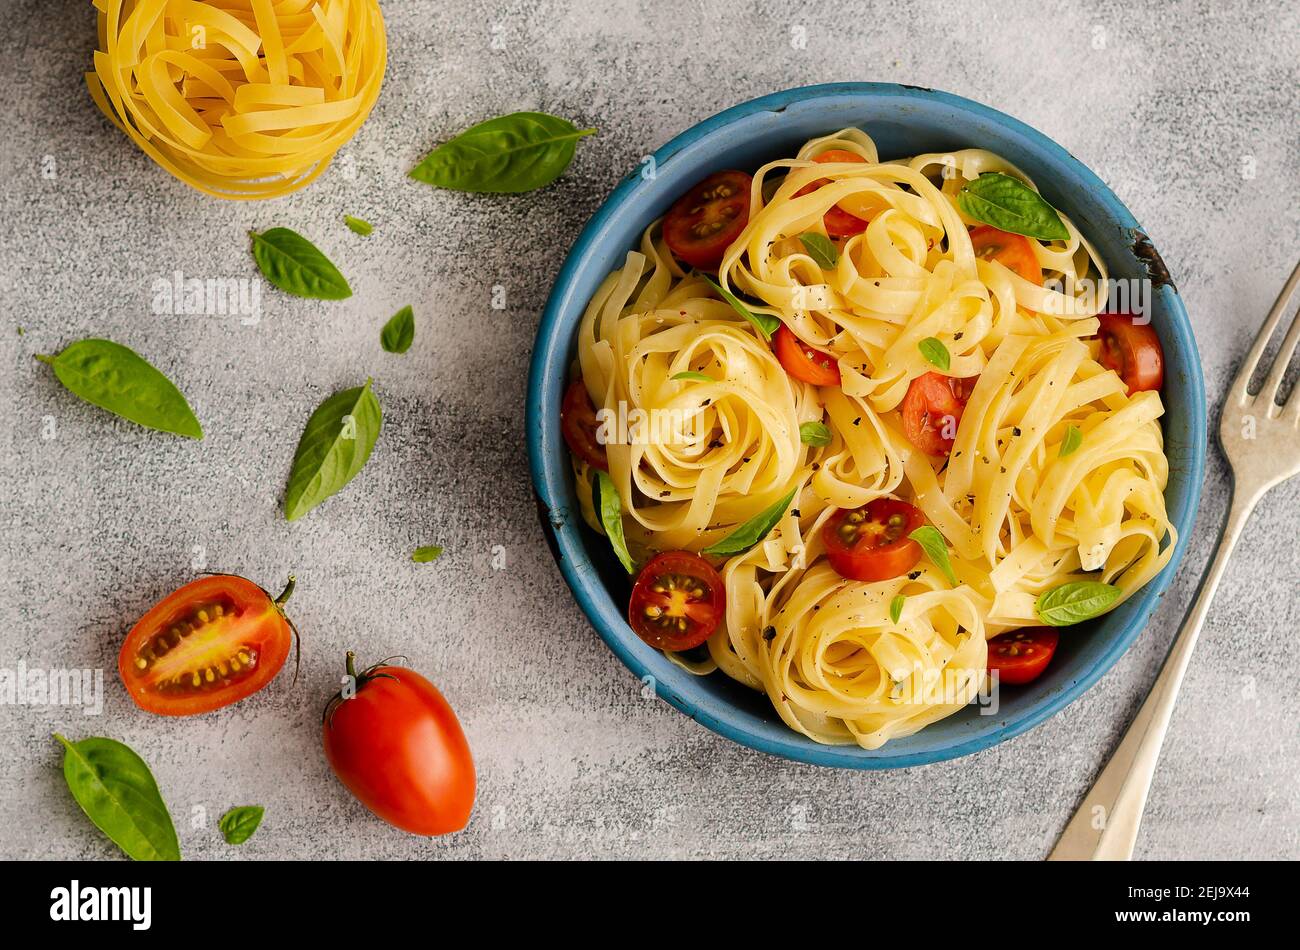 Fettuccine with cherry tomatoes and basil leaves in a blue plate on a grey backdrop with one and a half tomato, basil leaves and a nest of raw pasta. Stock Photo